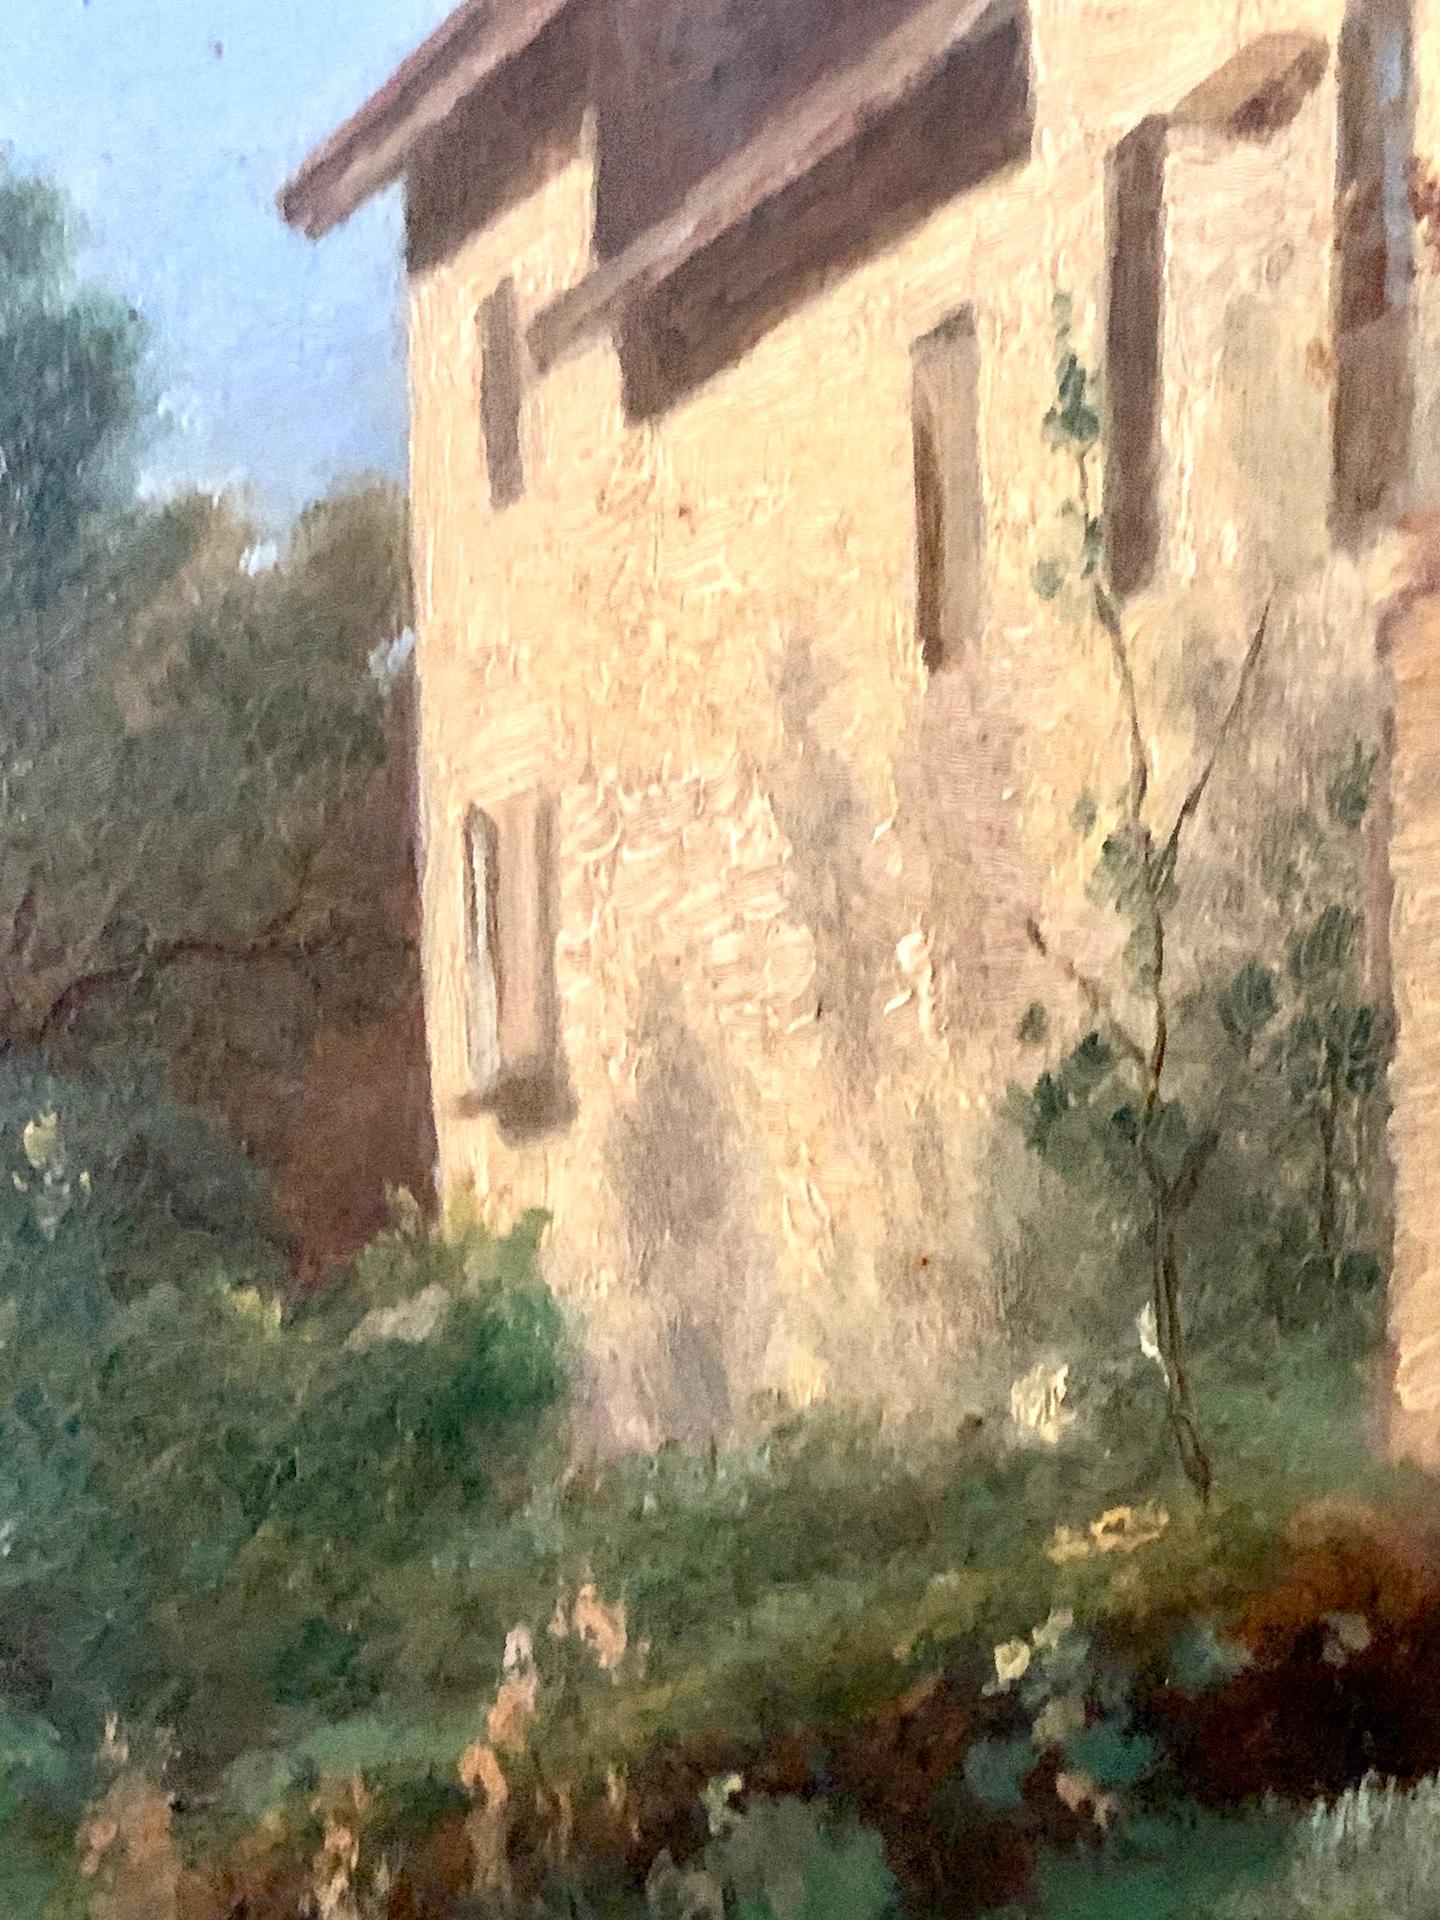 19th century French traditional and Impressionist landscape with farmhouse.

Very Pretty and well painted late 19th-century French landscape. 

The quality of the painting is obvious with the artist painting a very competent high-quality painting.